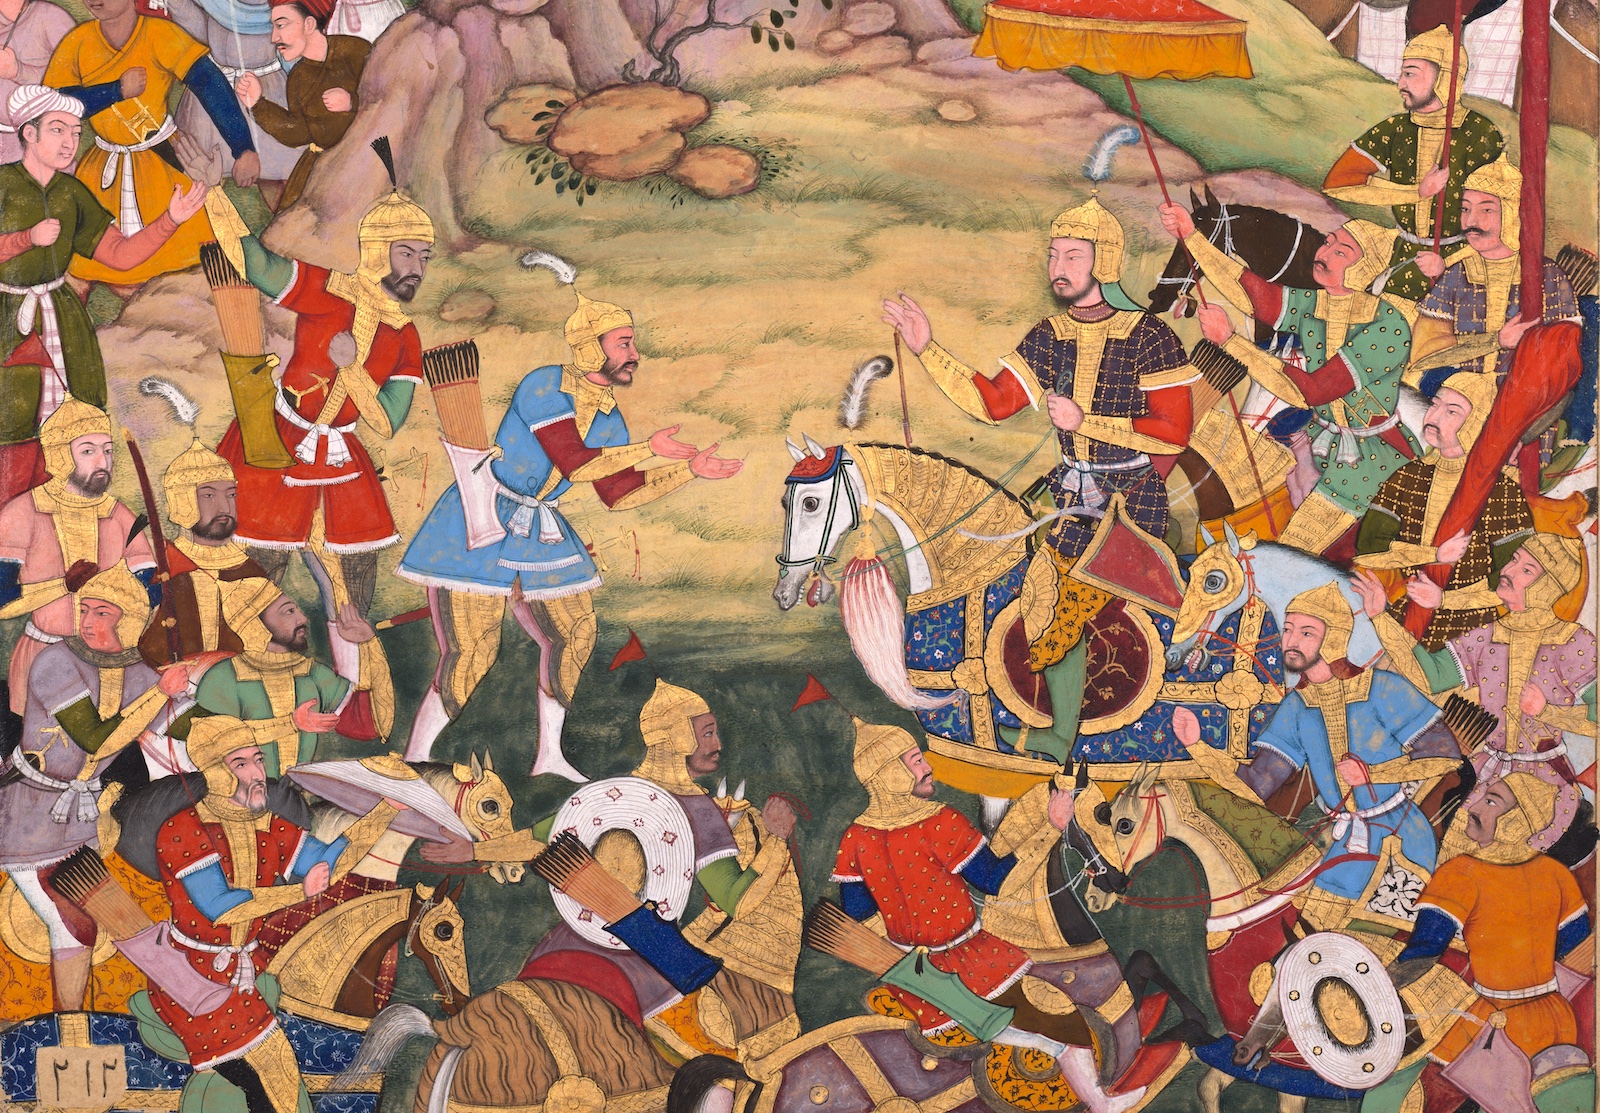 A Mughal depiction of the Siege of Arbela in the era of Hulagu Khan, c. 1596. 